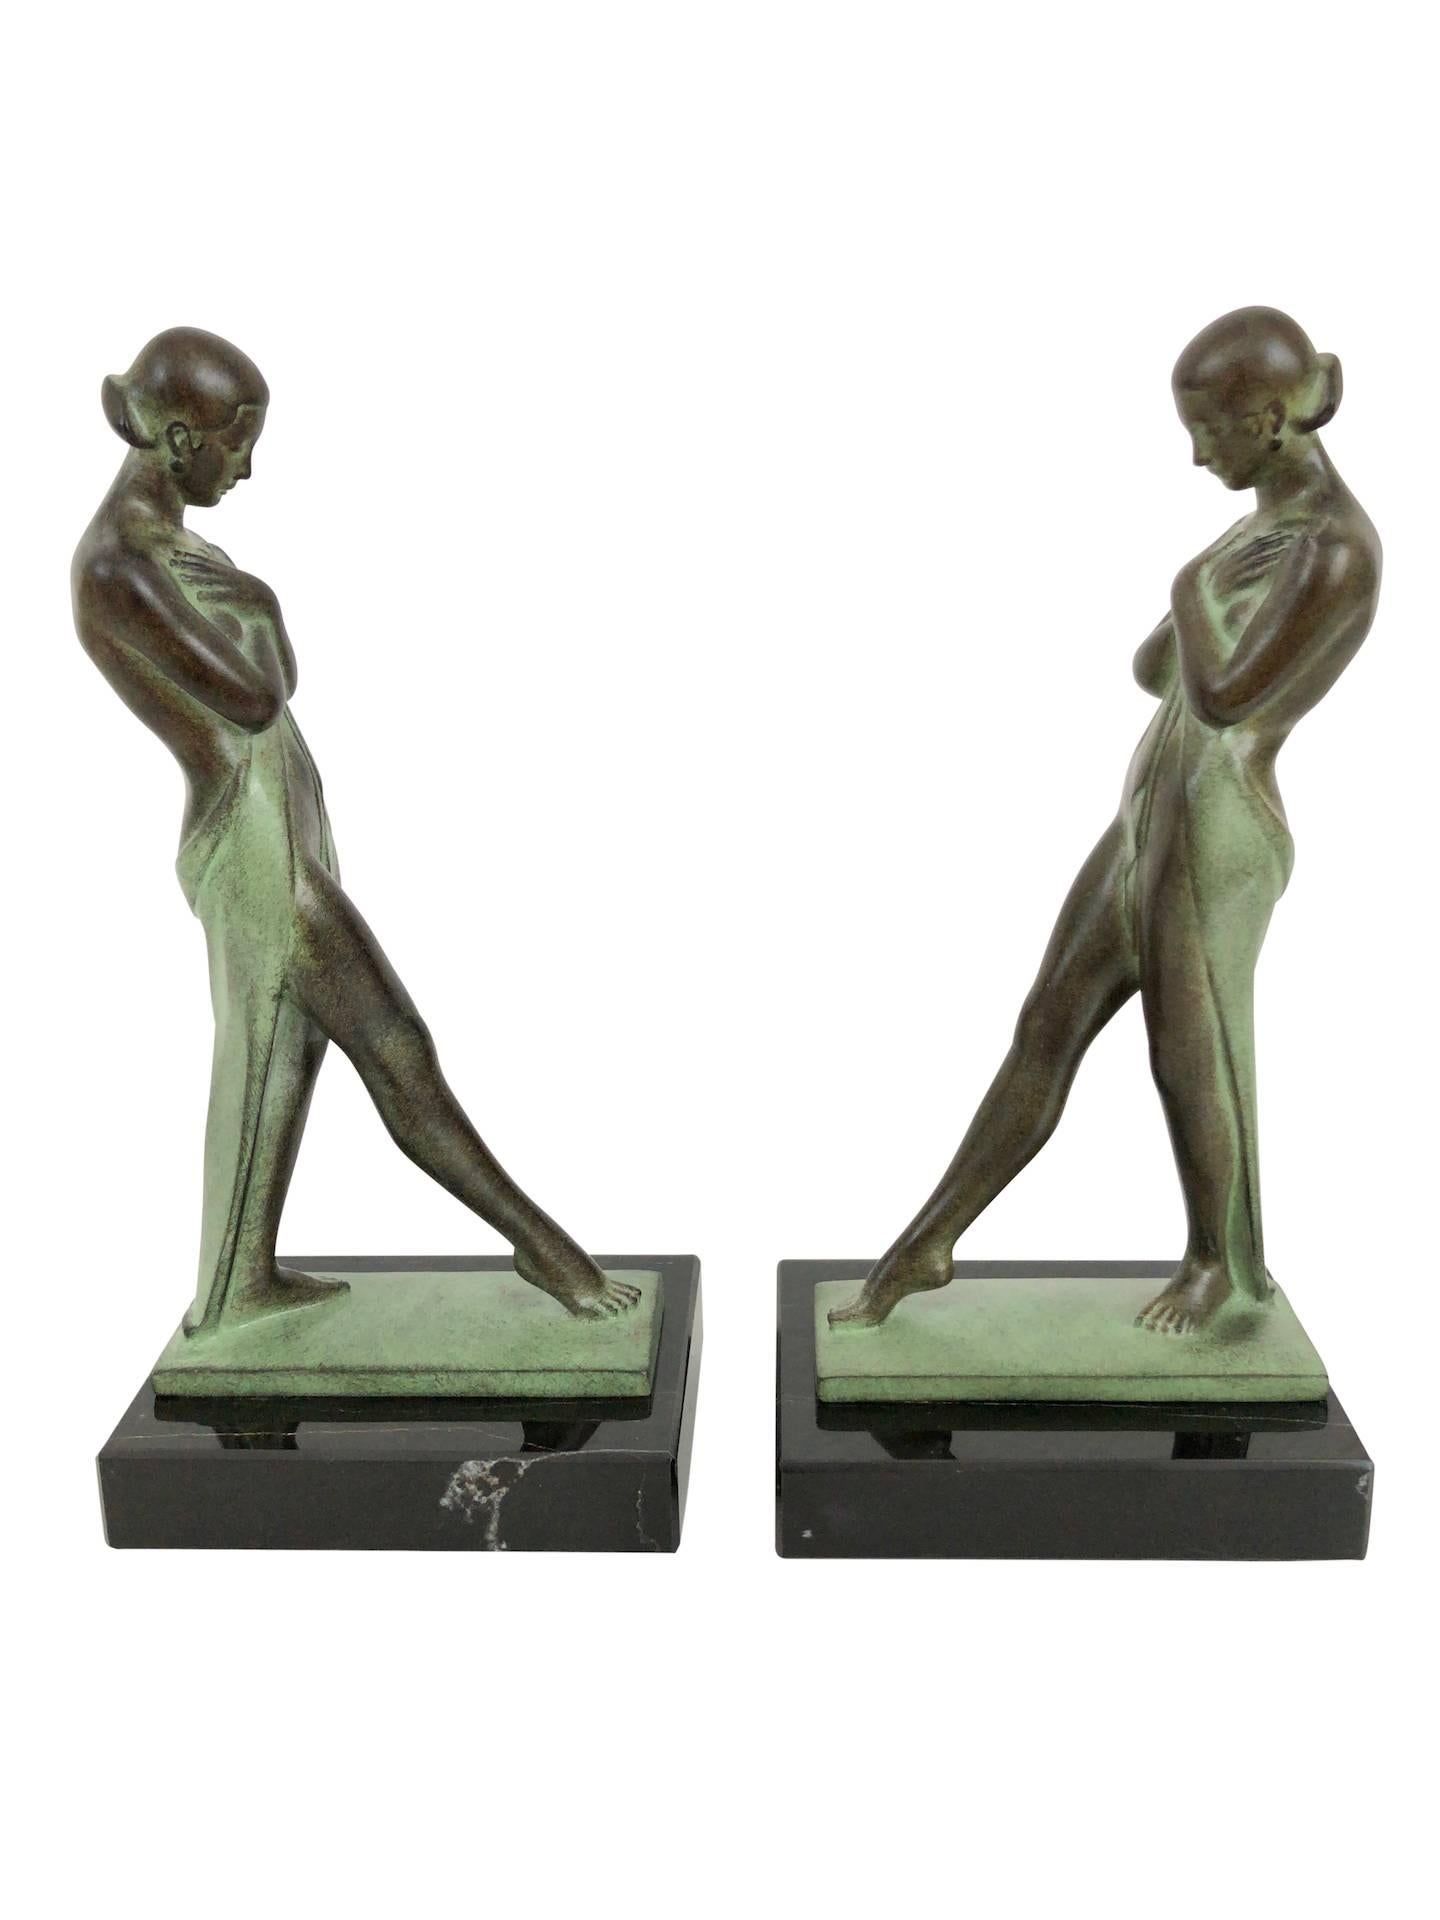 French Art Deco Style Lady Bookends Meditation by Pierre Le Faguays for Max Le Verrier